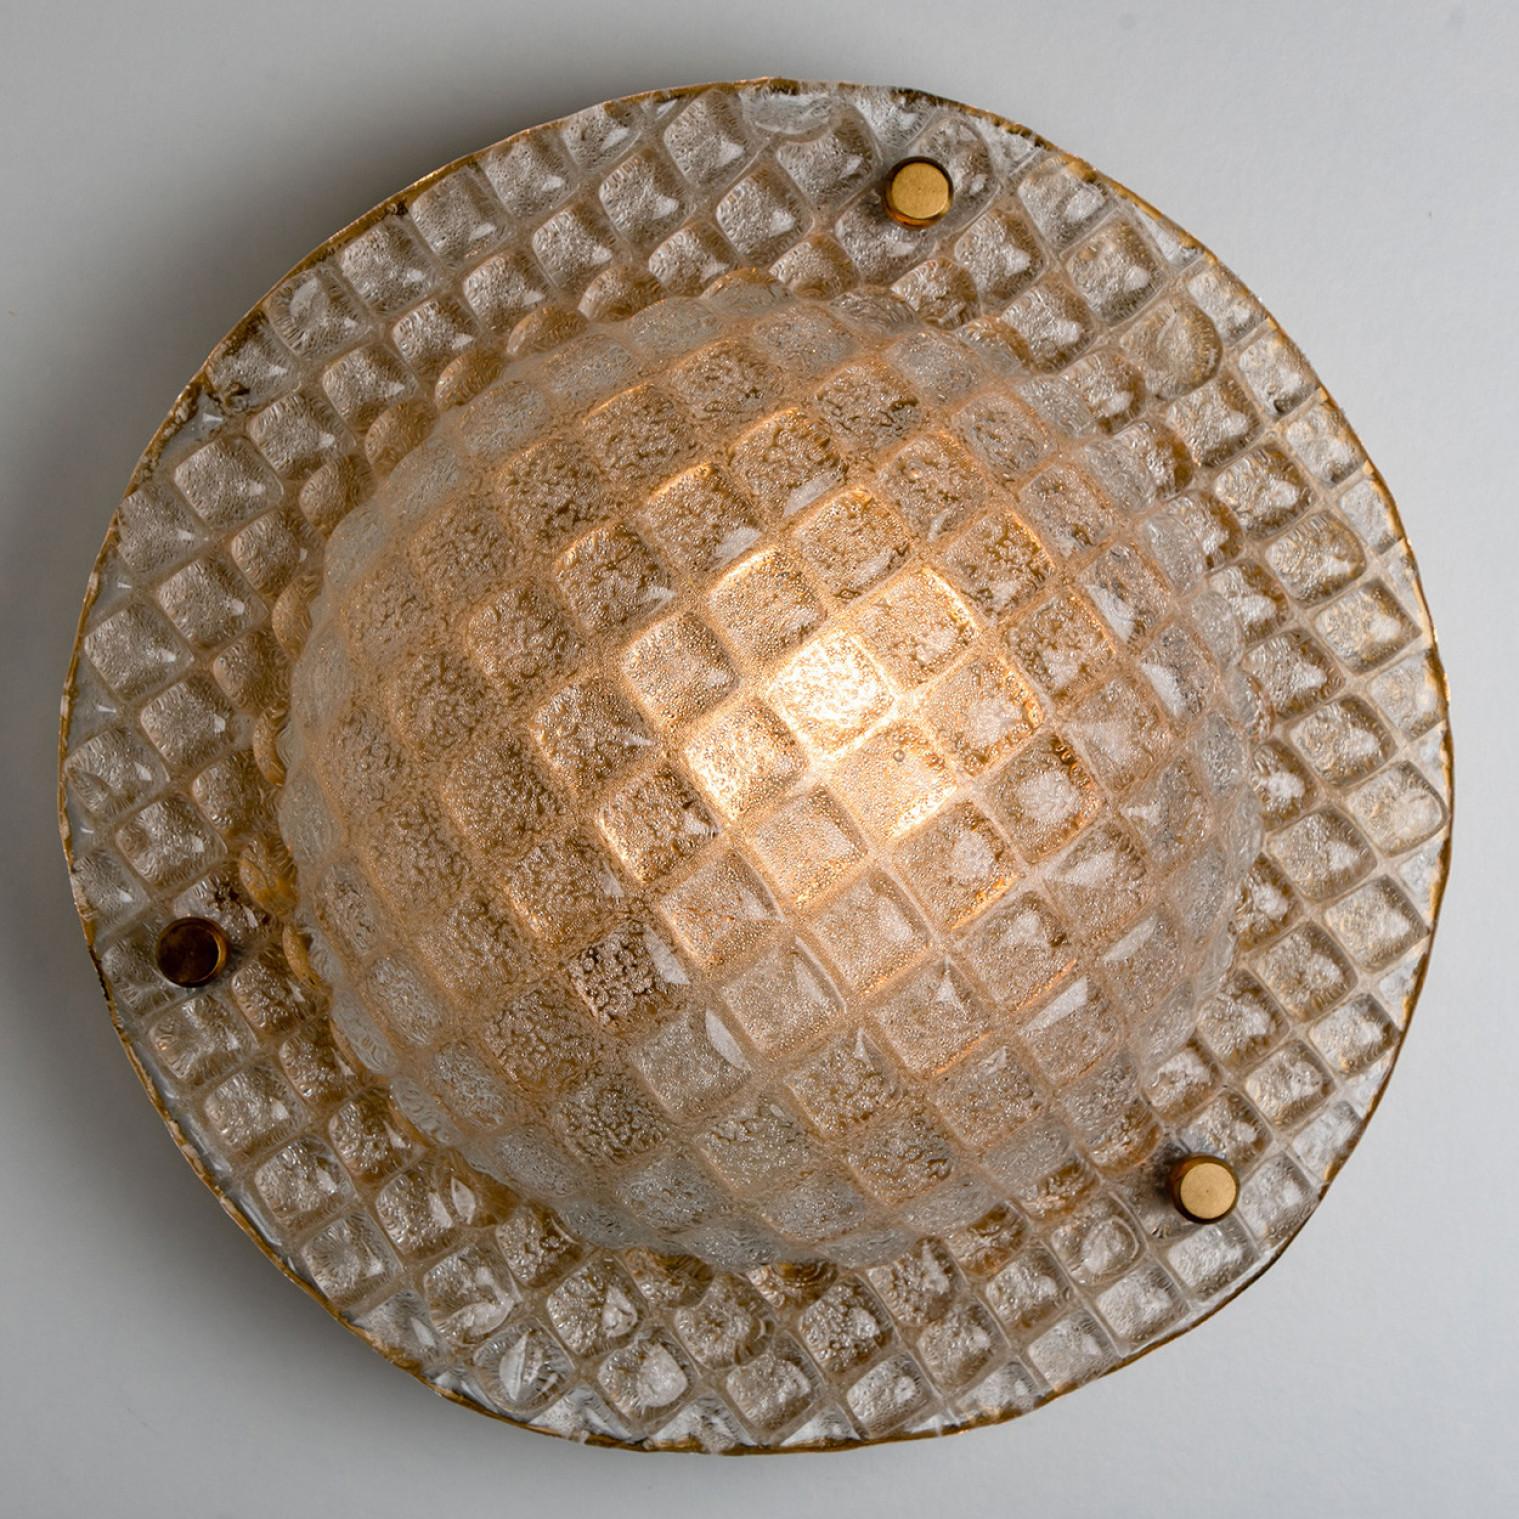 1 of the 2 high quality modern thick diamond textured glass flush mount. Manufactured by Hillebrand, Germany around 1970.
The flush mount features an impressive huge round handmade glass dish. With a brass back plate. Can also work as an impressive